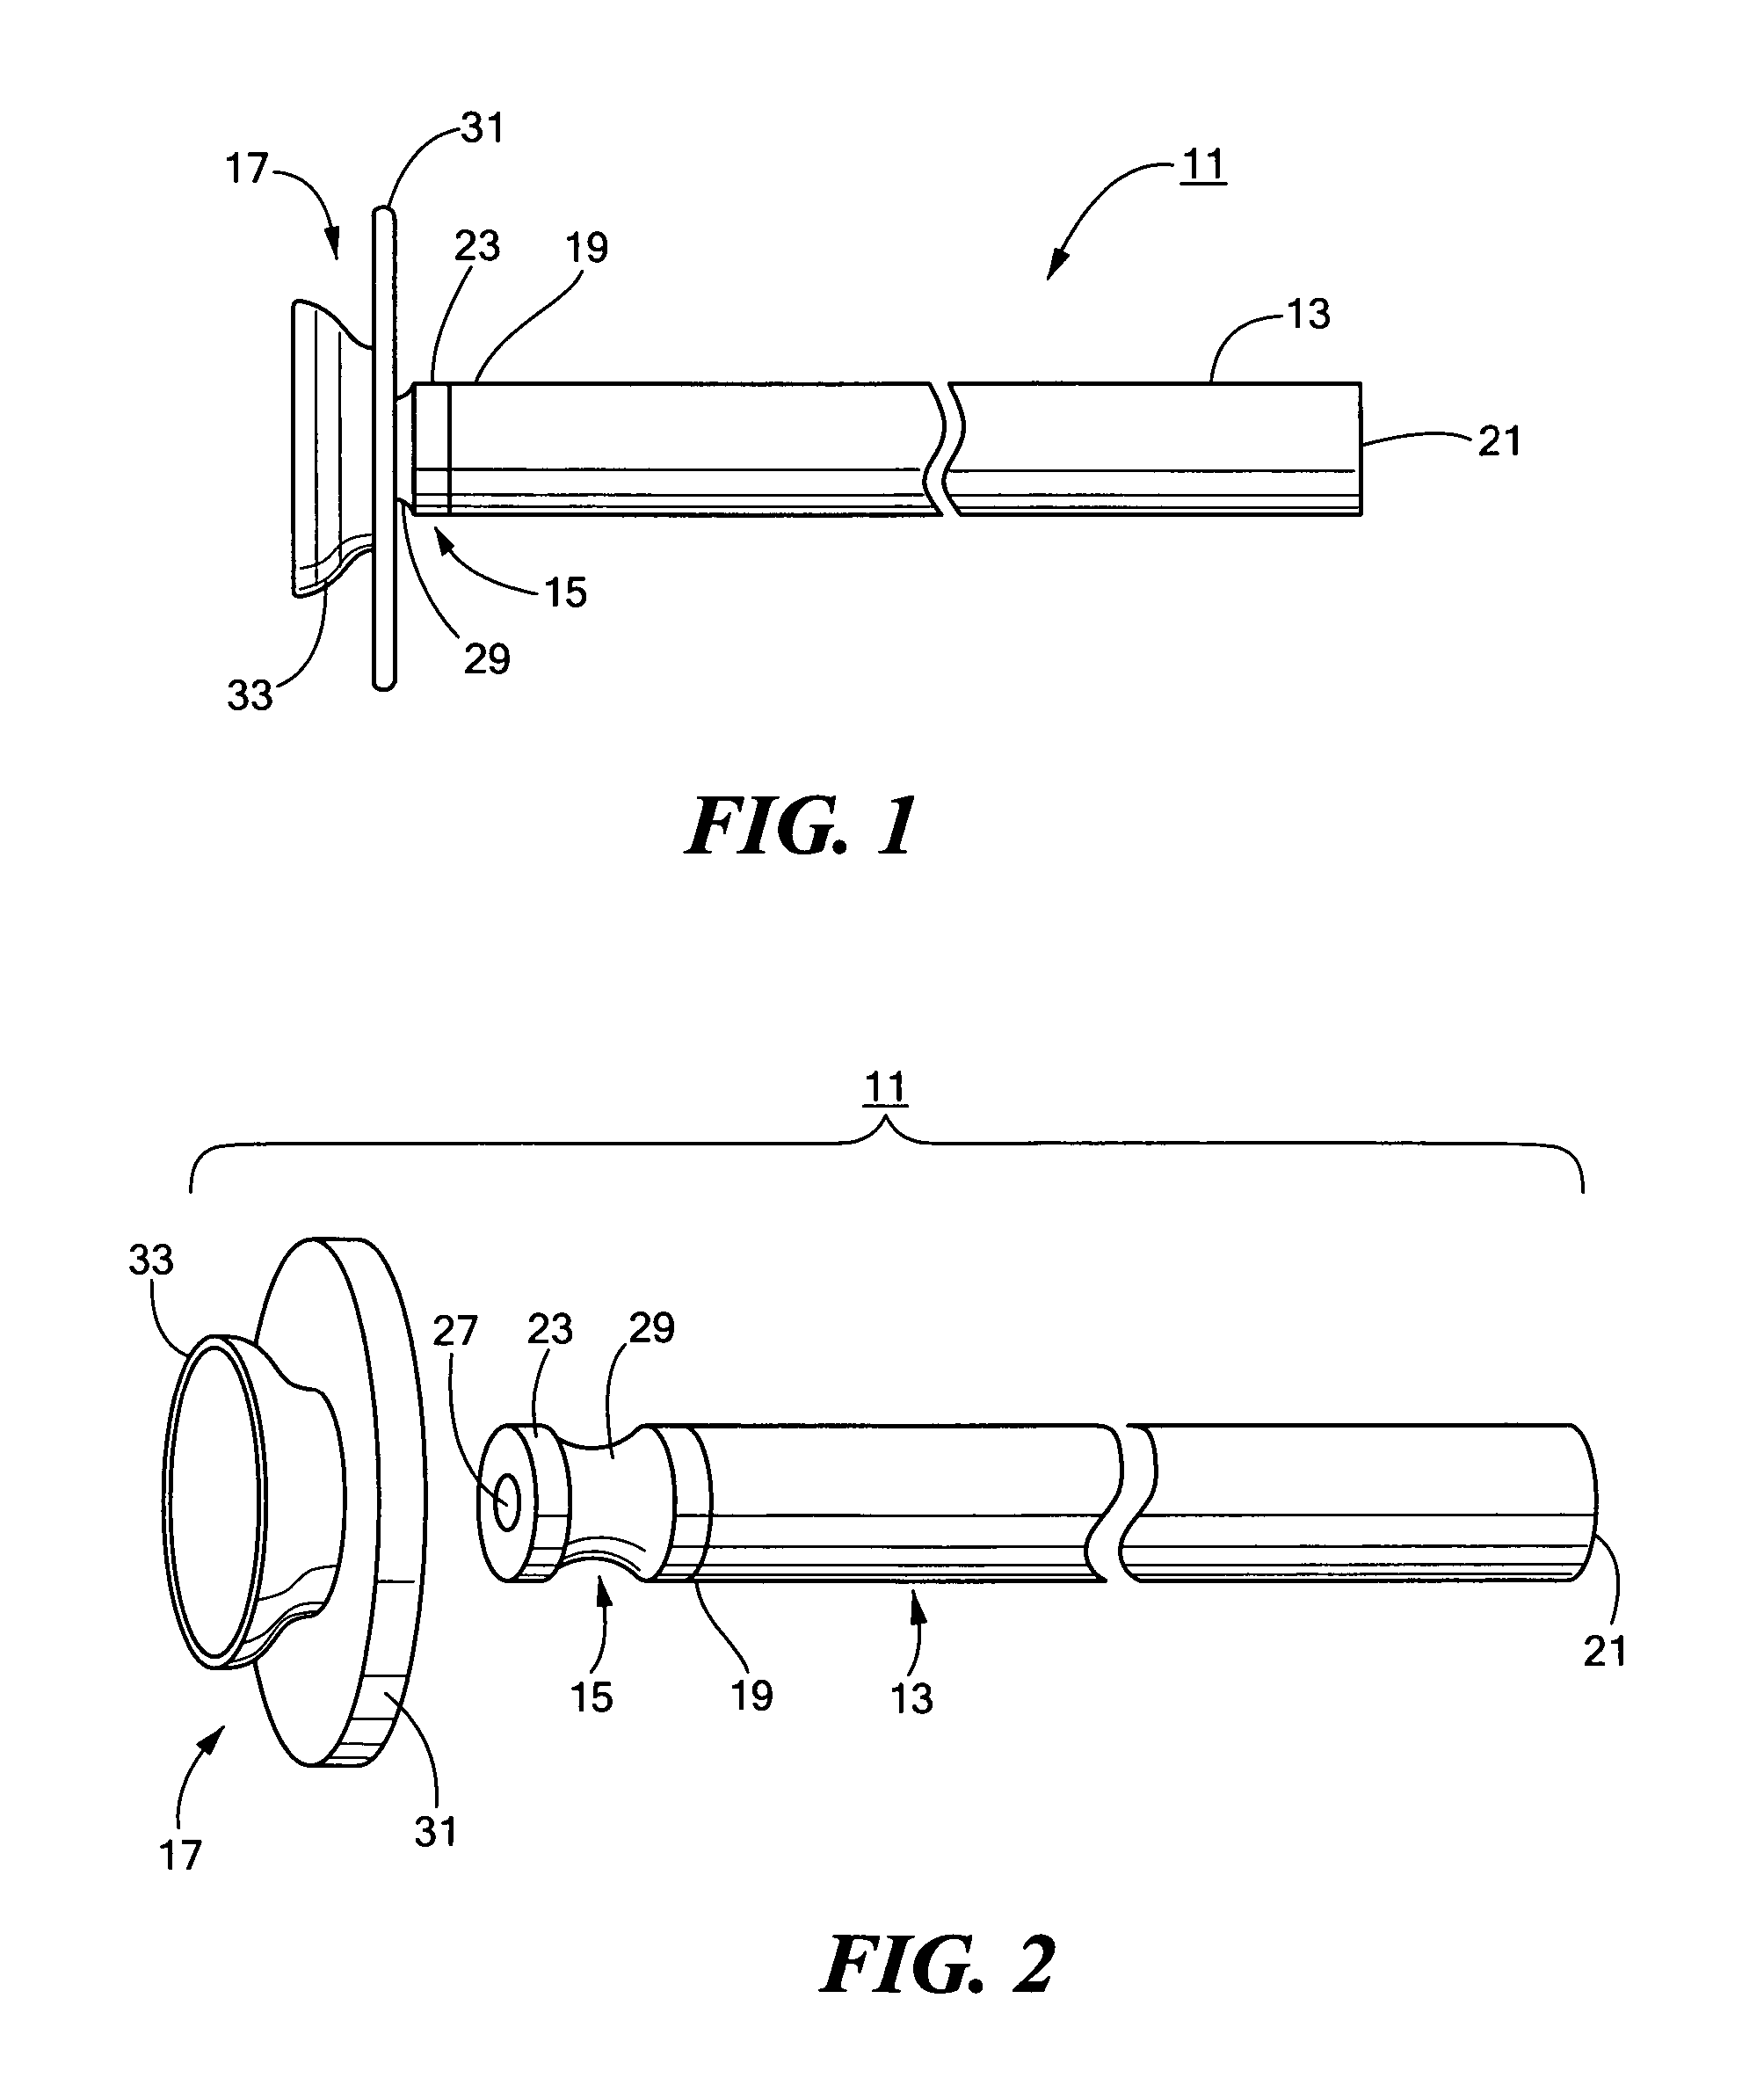 Catheter assembly and method for internally anchoring a catheter in a patient